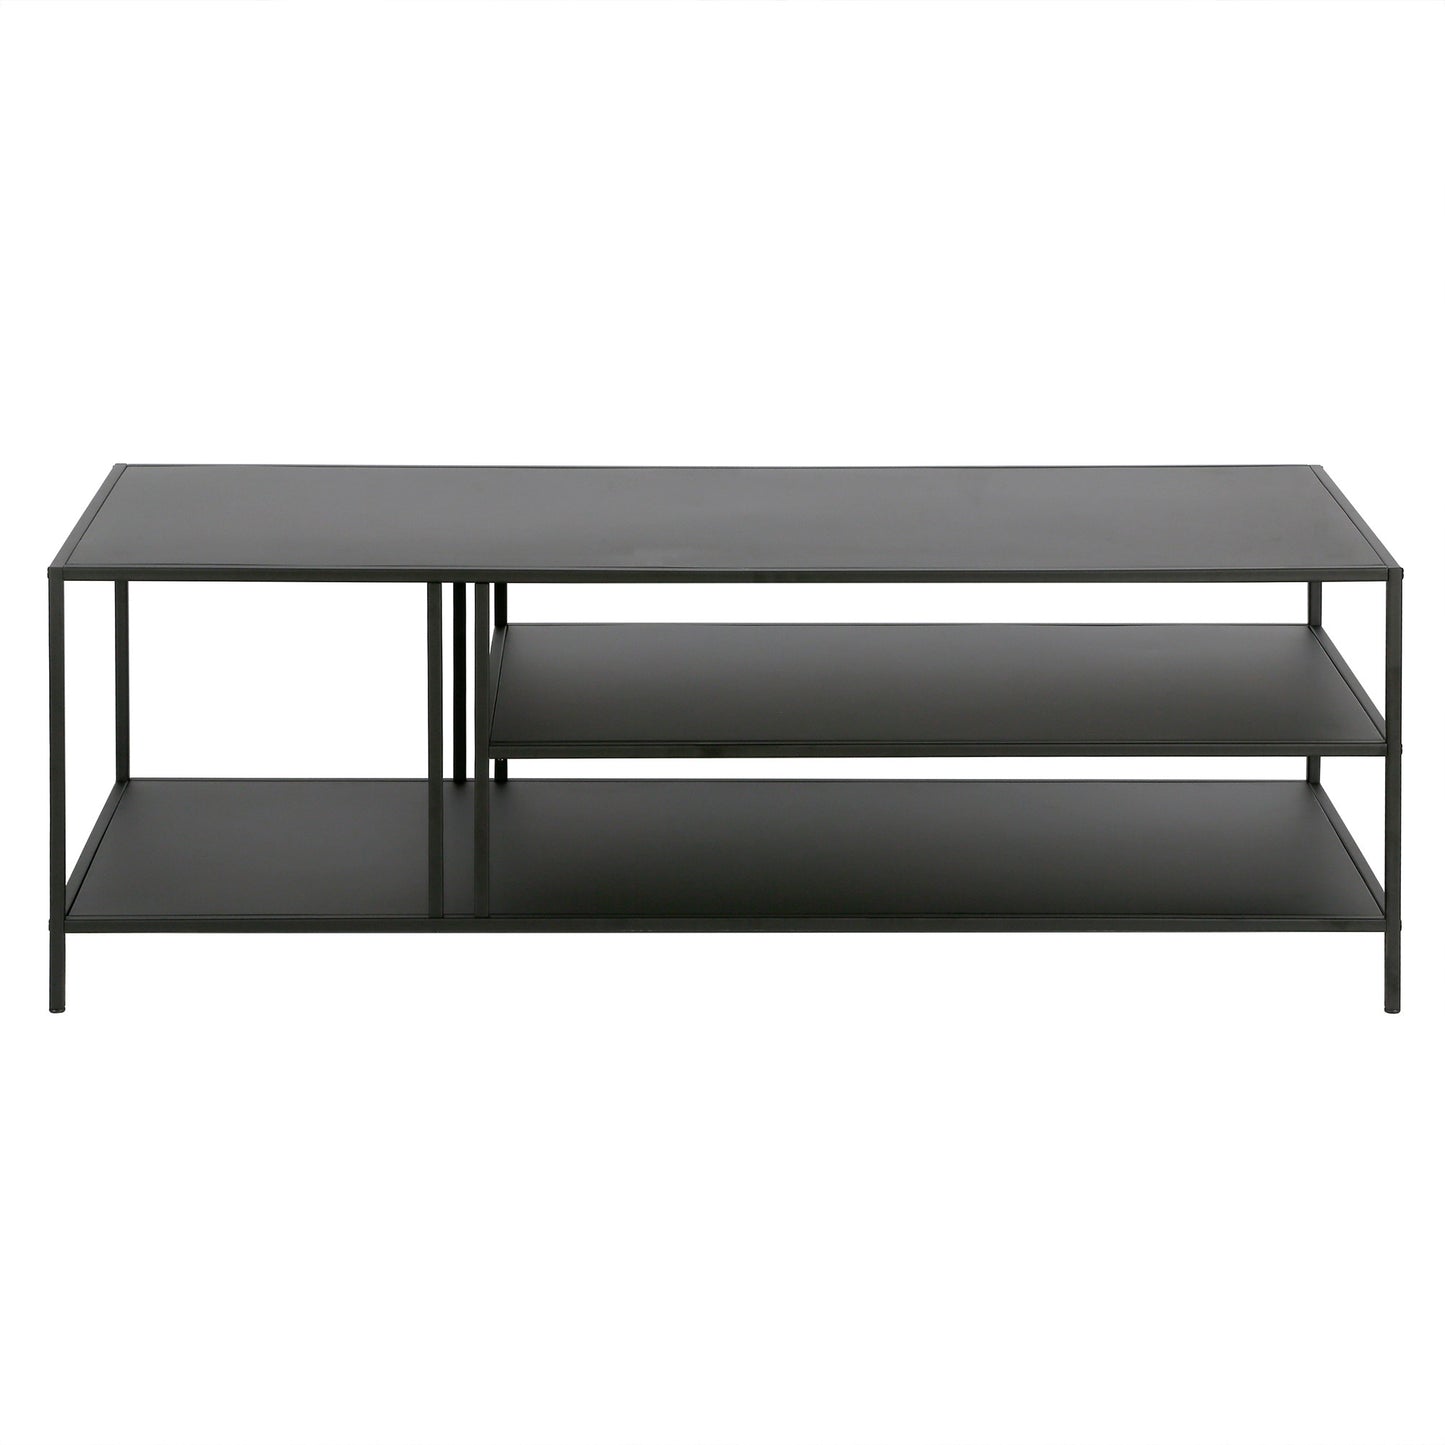 48" Black Steel Rectangular Coffee Table With Two Shelves By Homeroots